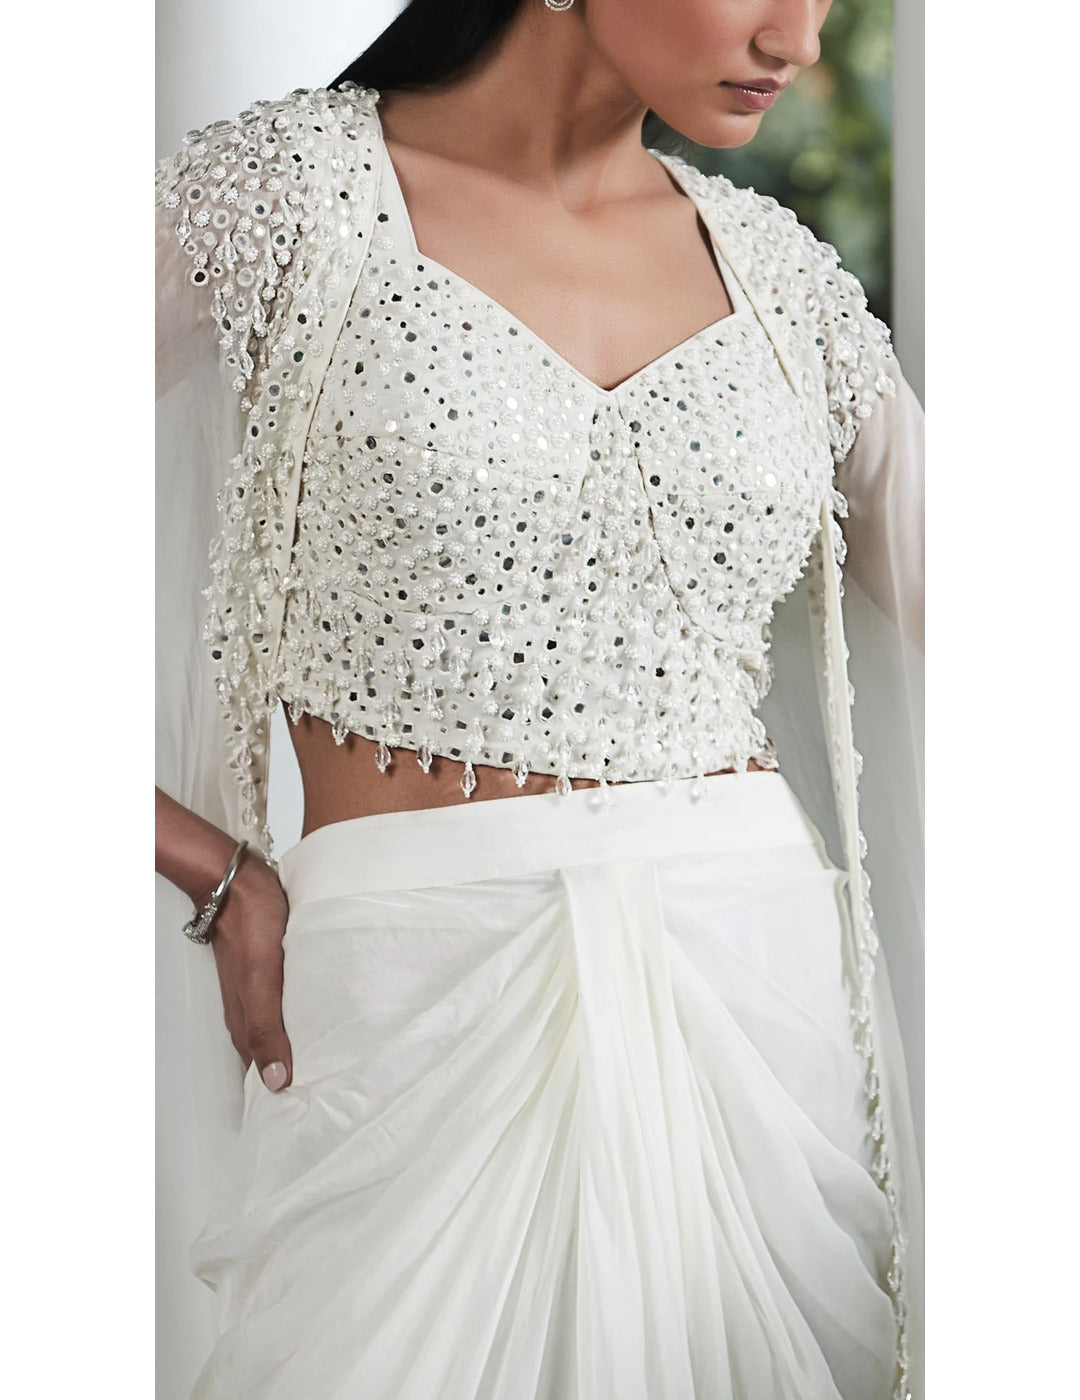 Ivory Embroidered Cape Set